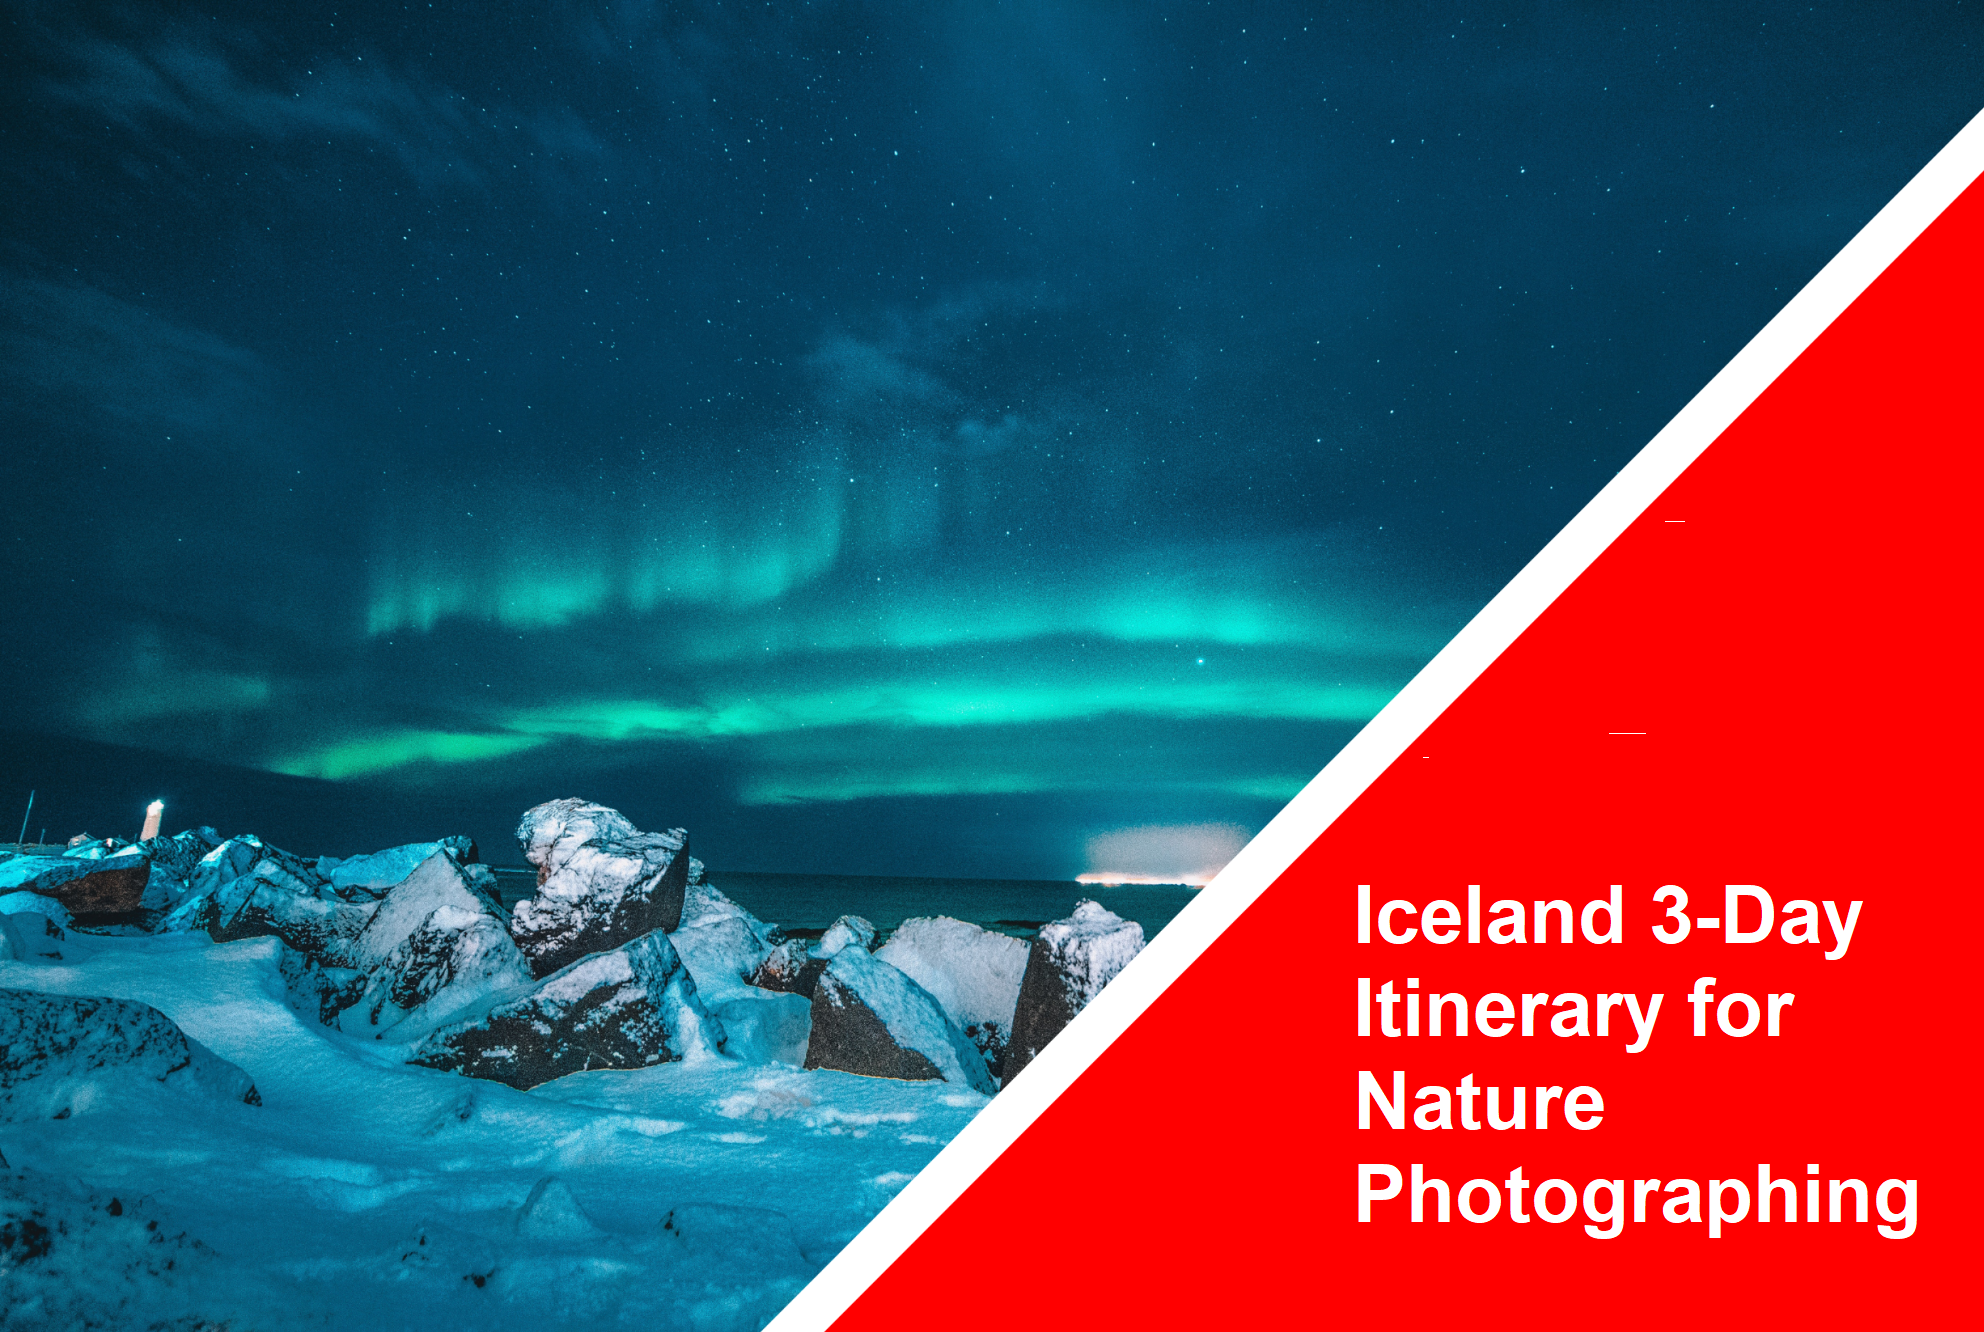 Iceland 3-Day Itinerary for Nature Photographing